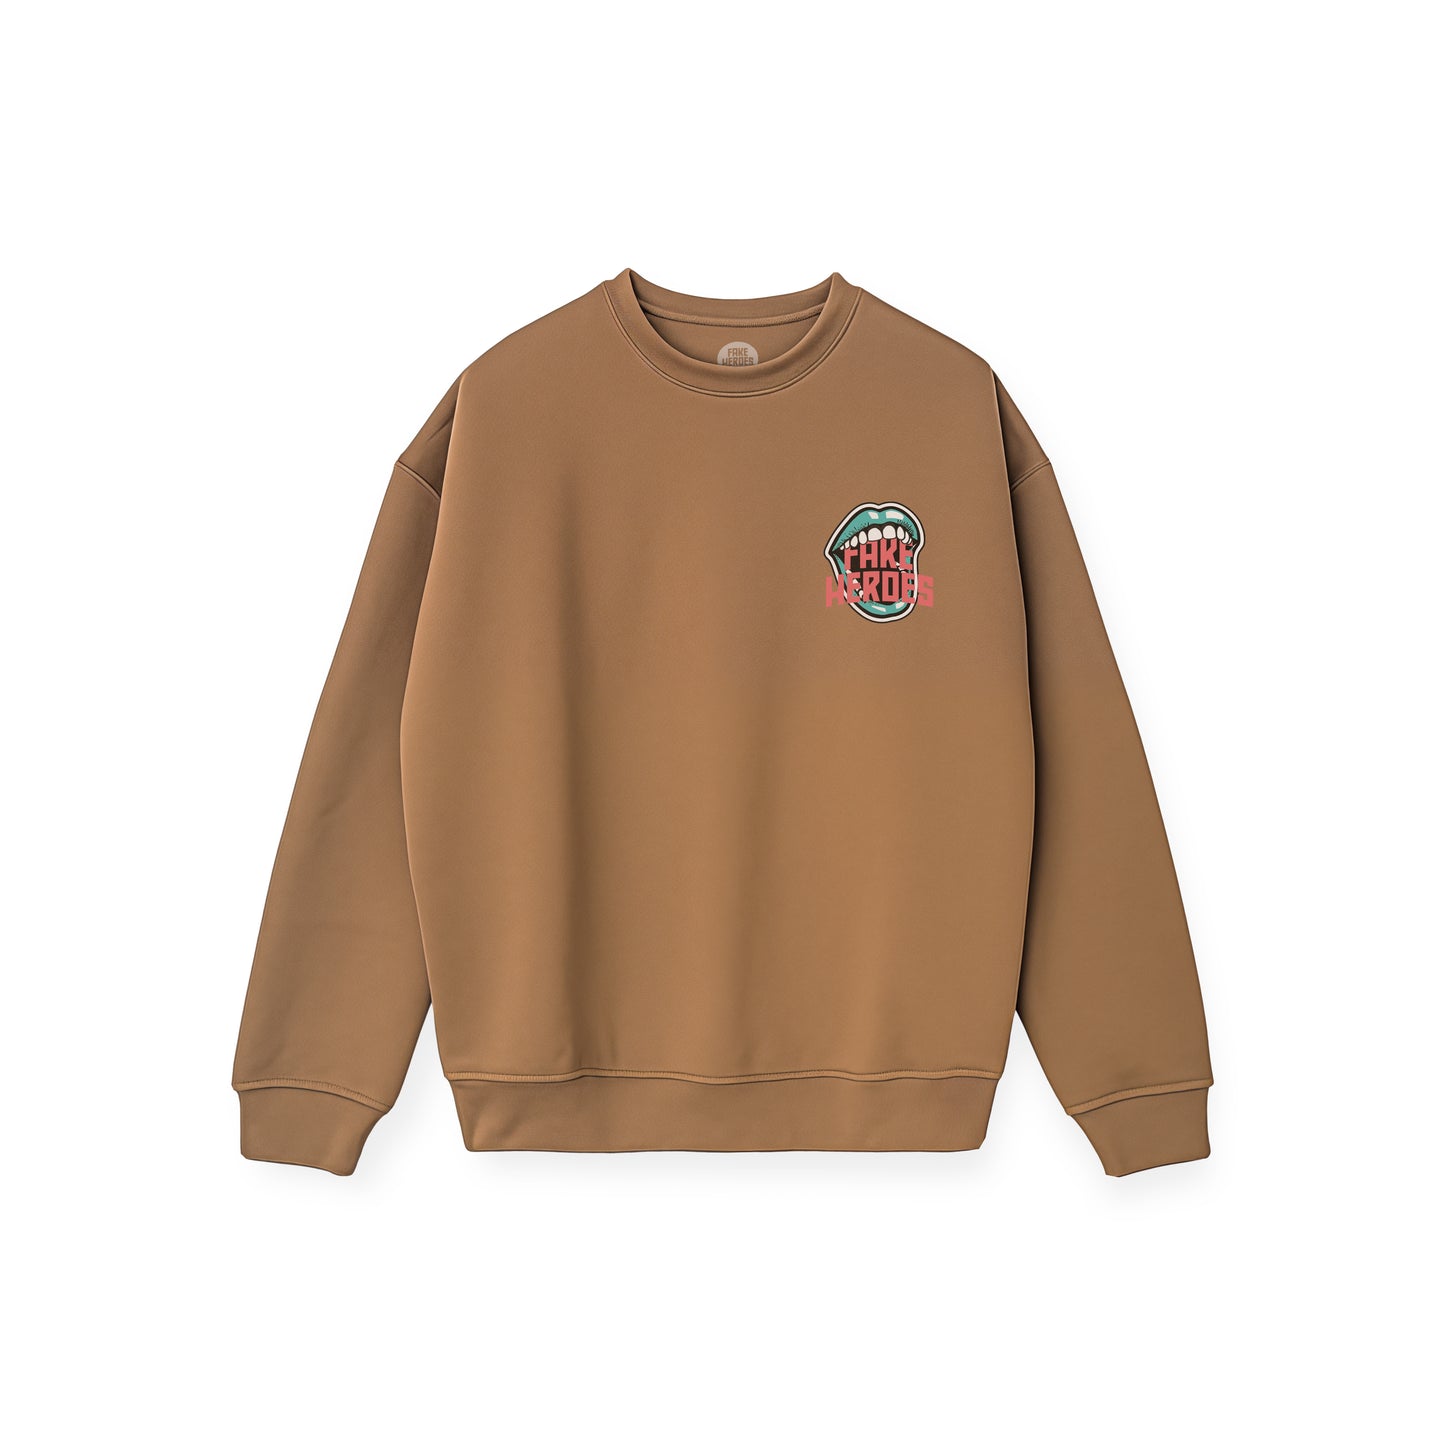 EYE IN MOUTH CREW SWEATER